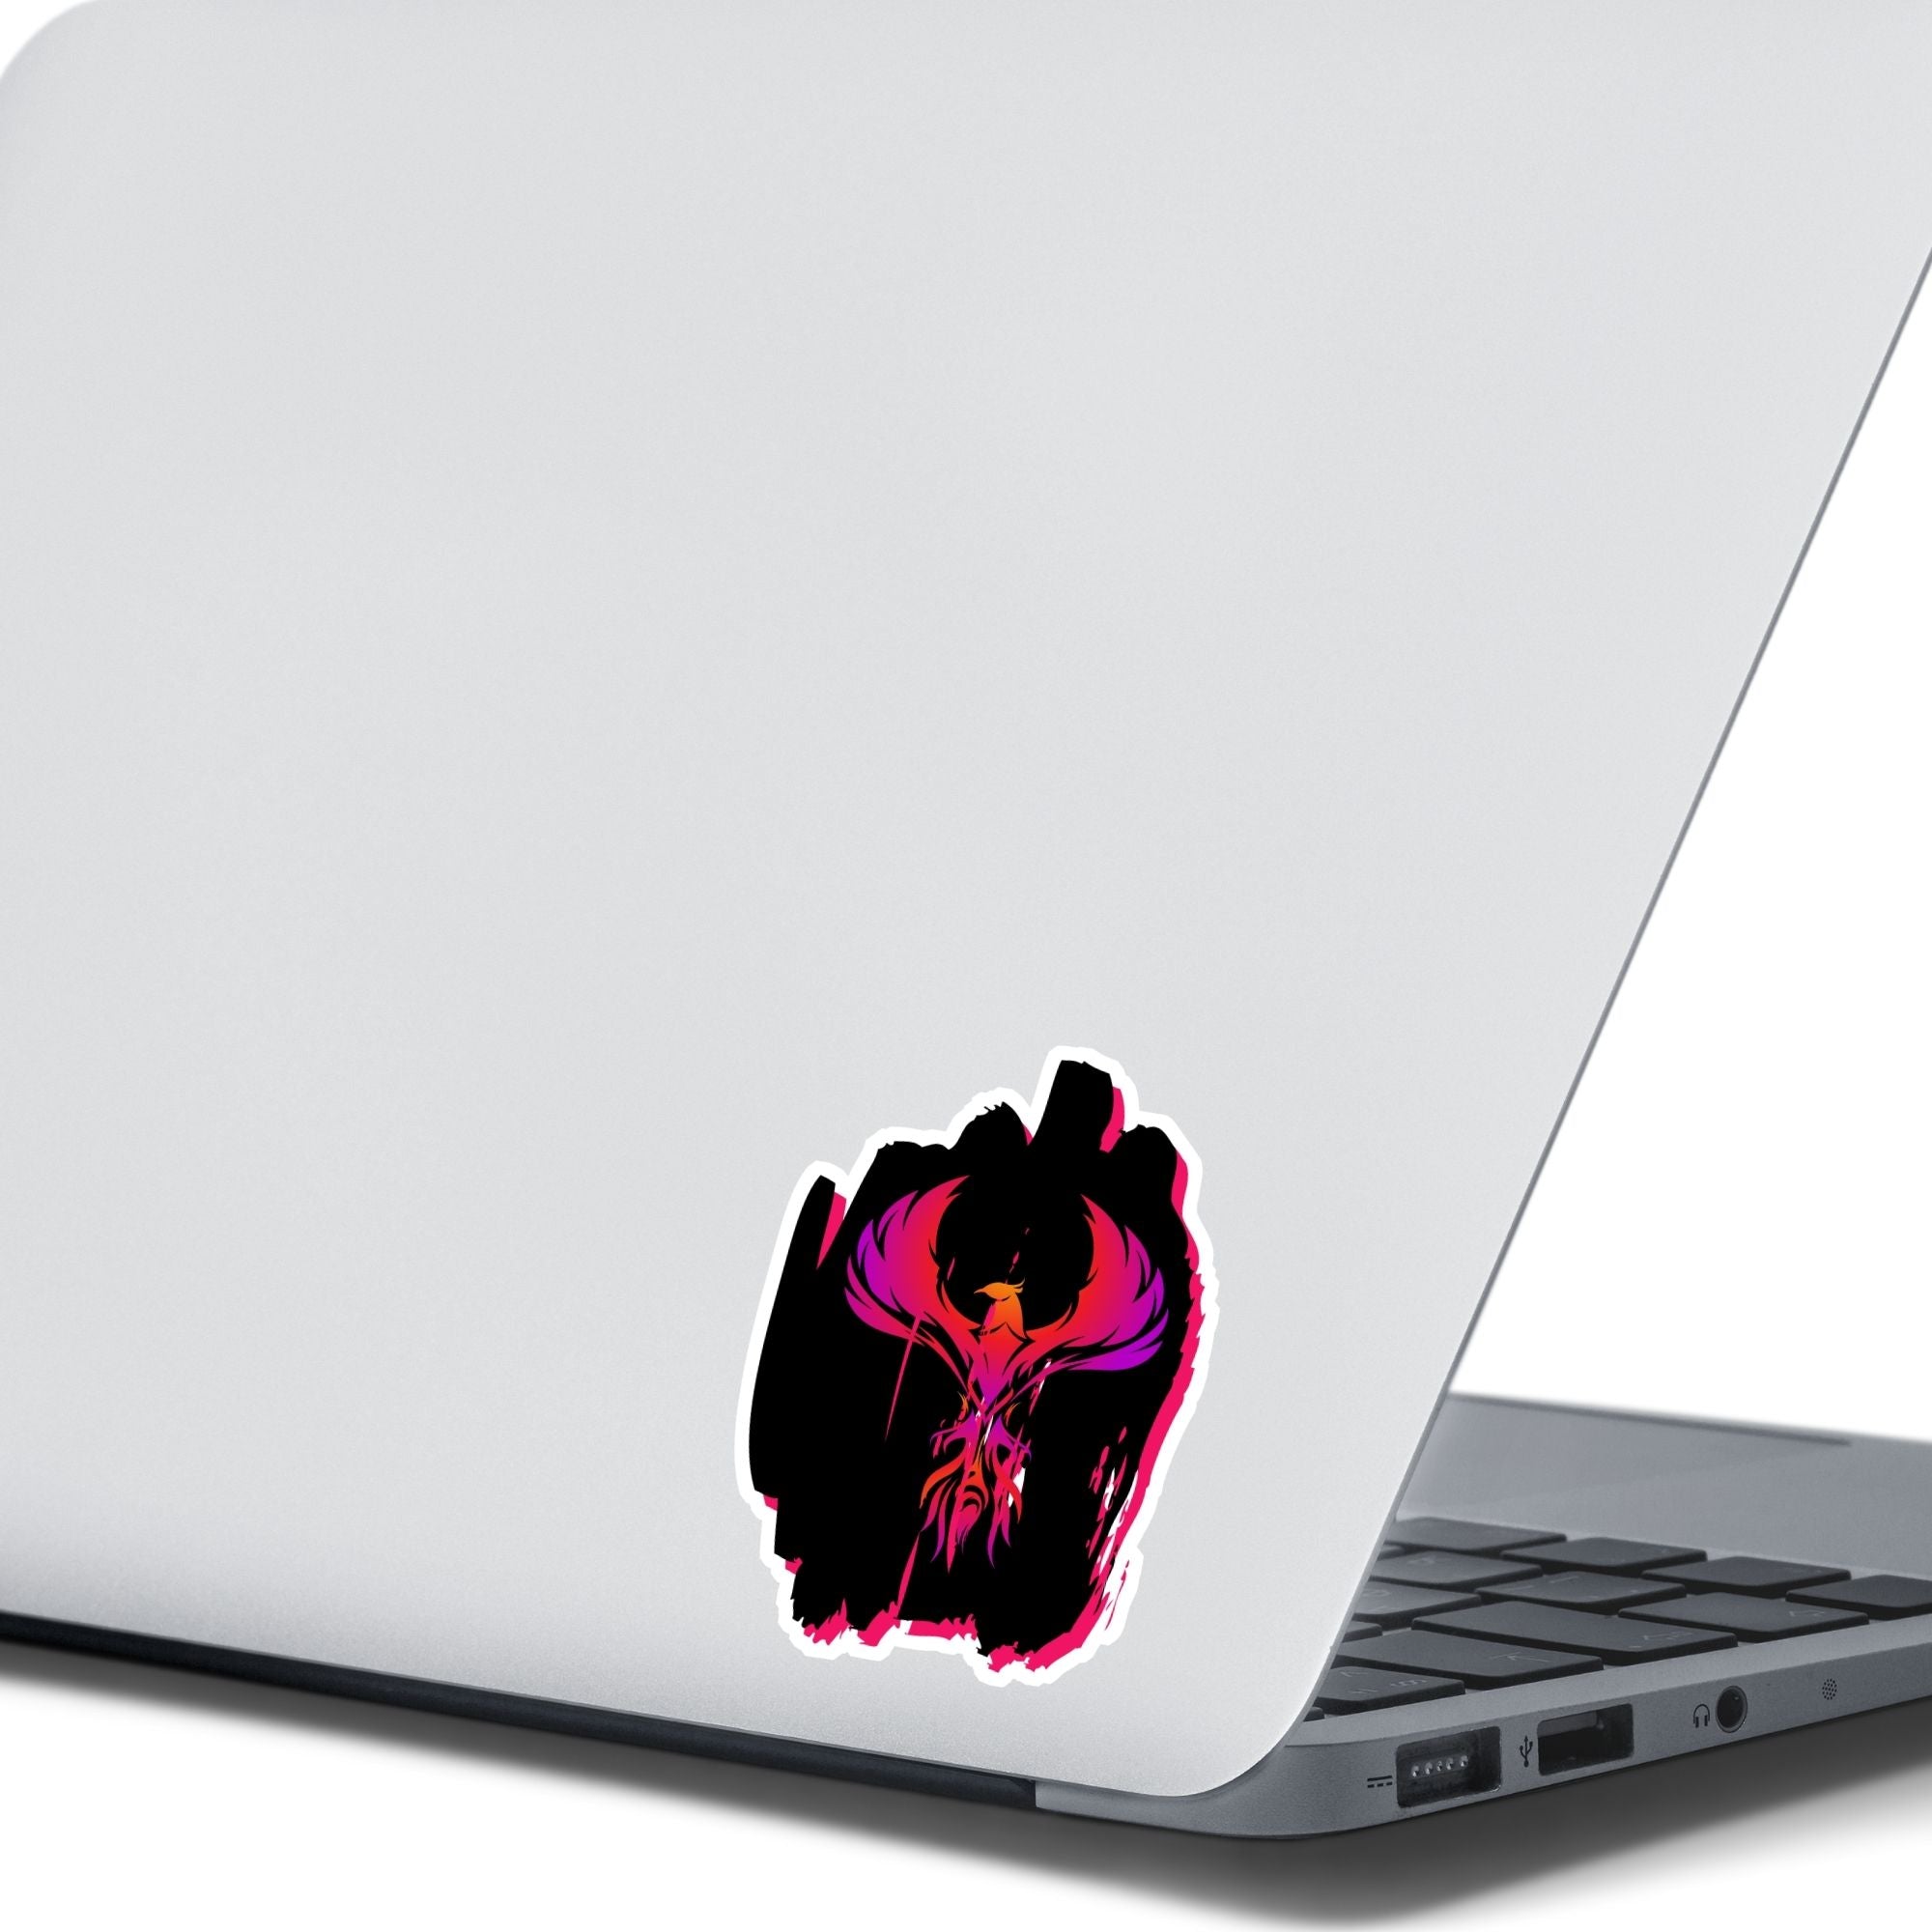 Phoenix rising - this individual die-cut sticker features a purple, red, and orange phoenix on a black background. This image shows the Phoenix on Black die-cut sticker on the back of an open laptop.